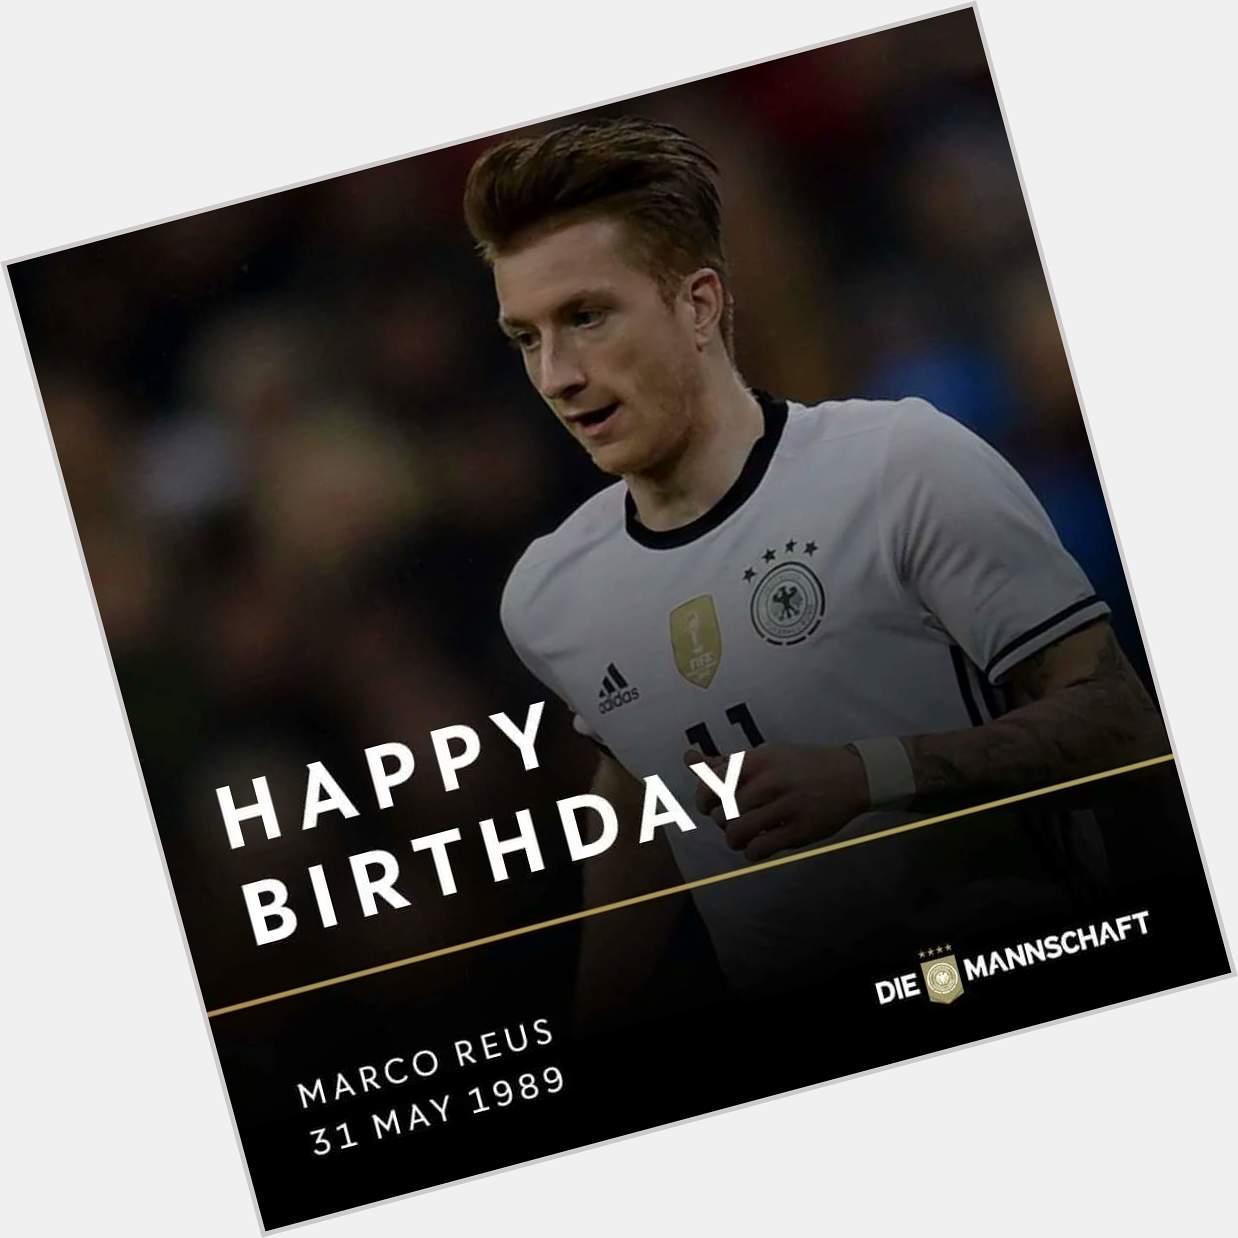 Happy Birthday Marco Reus
Much love for you  